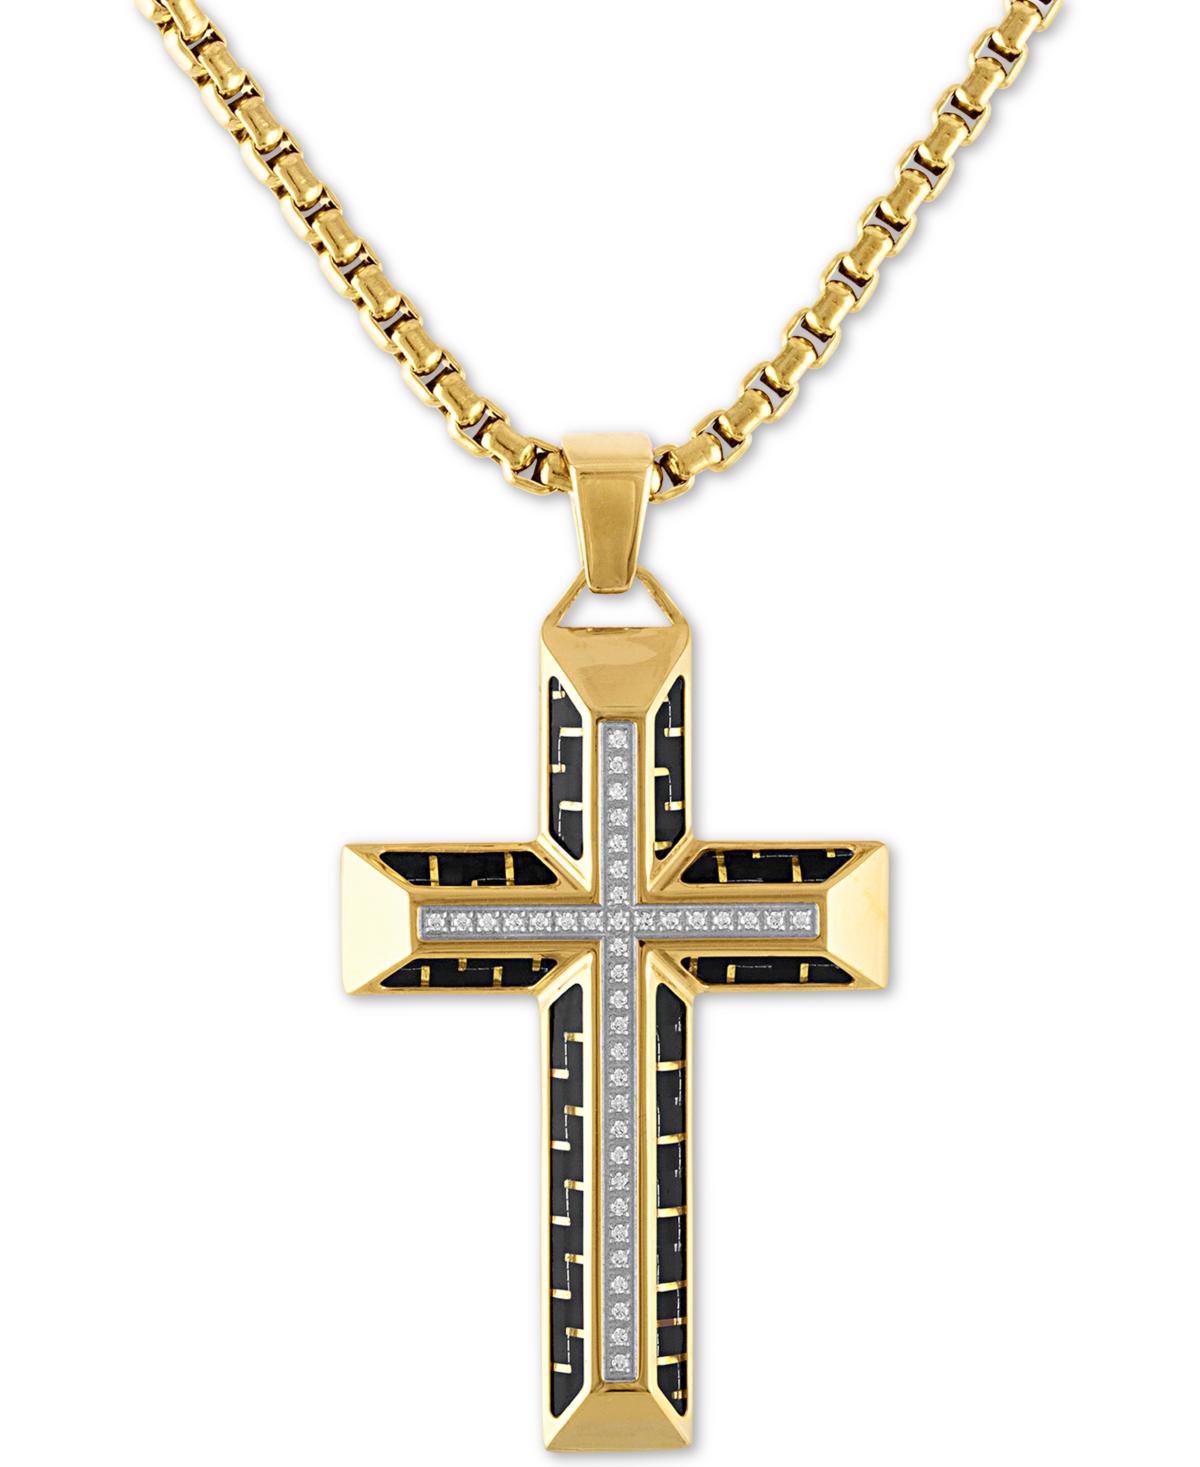 Diamond Cross 22" Pendant Necklace in Gold Tone Ion-Plated Stainless Steel & Black Carbon Fiber, Created for Macy's (Also in Bla